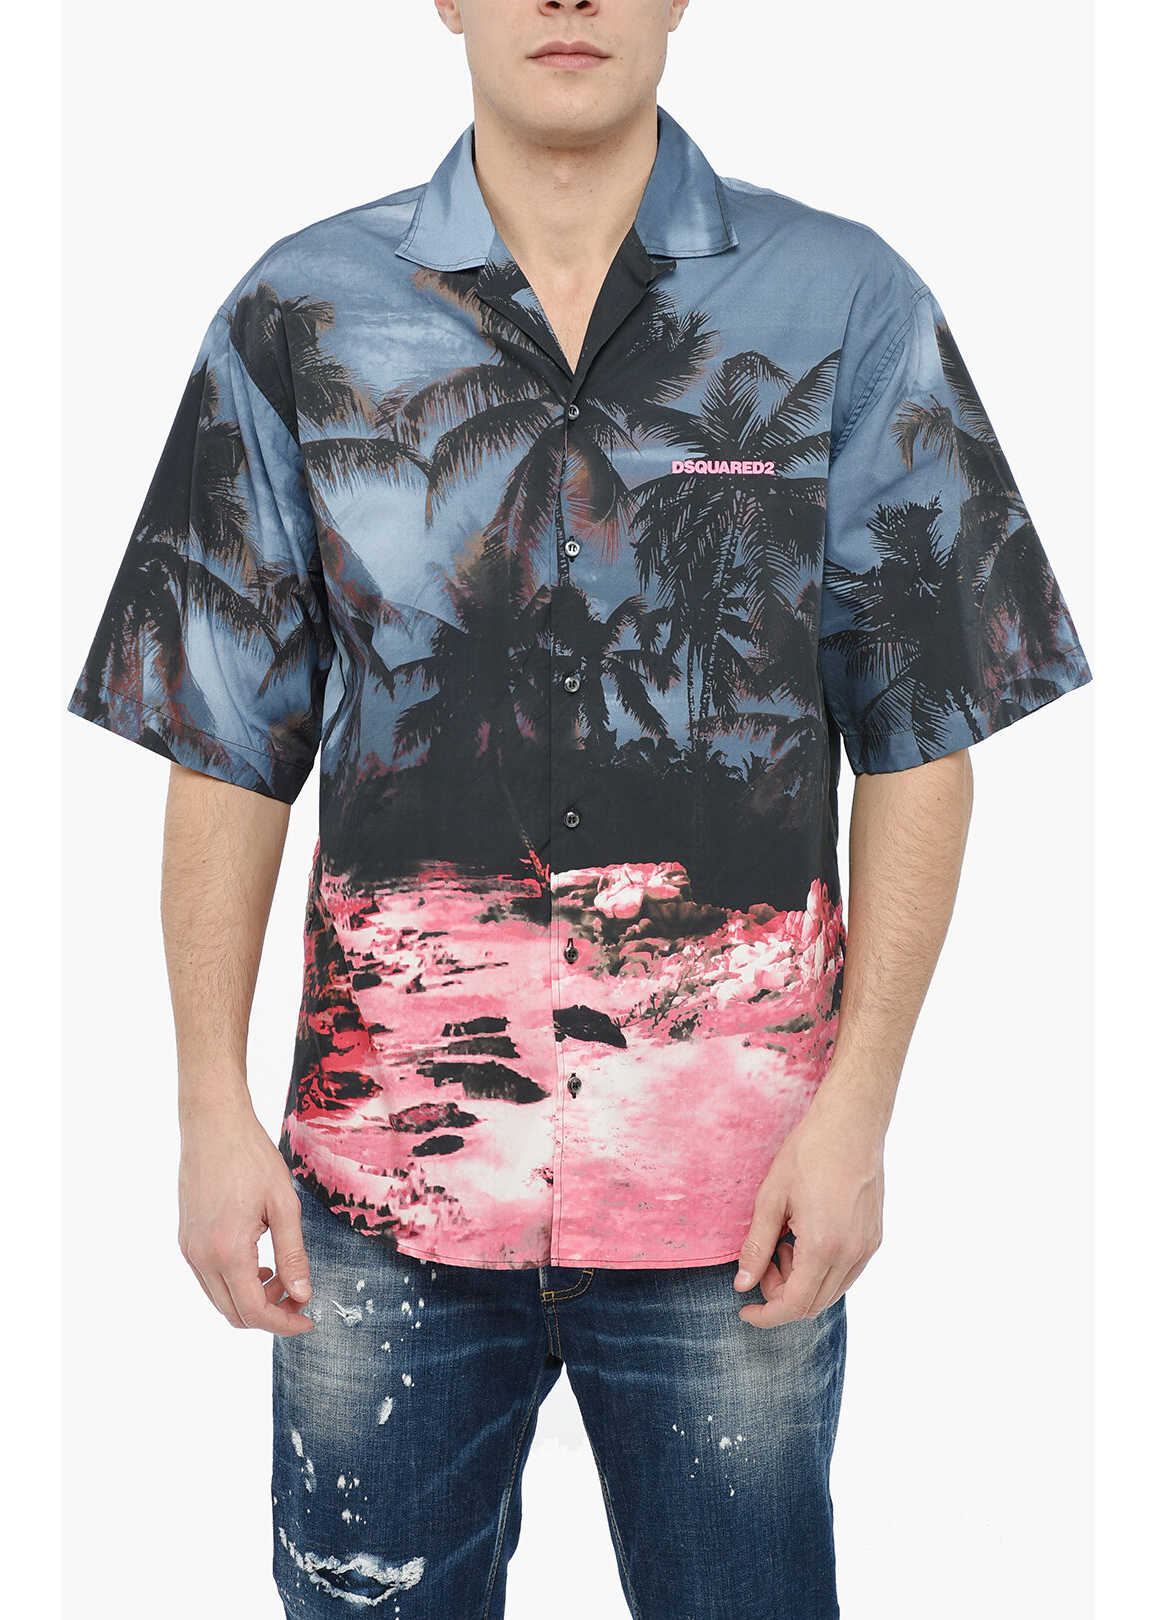 DSQUARED2 Sunrise Bowling Shirt With All Over Graphic Print Blue